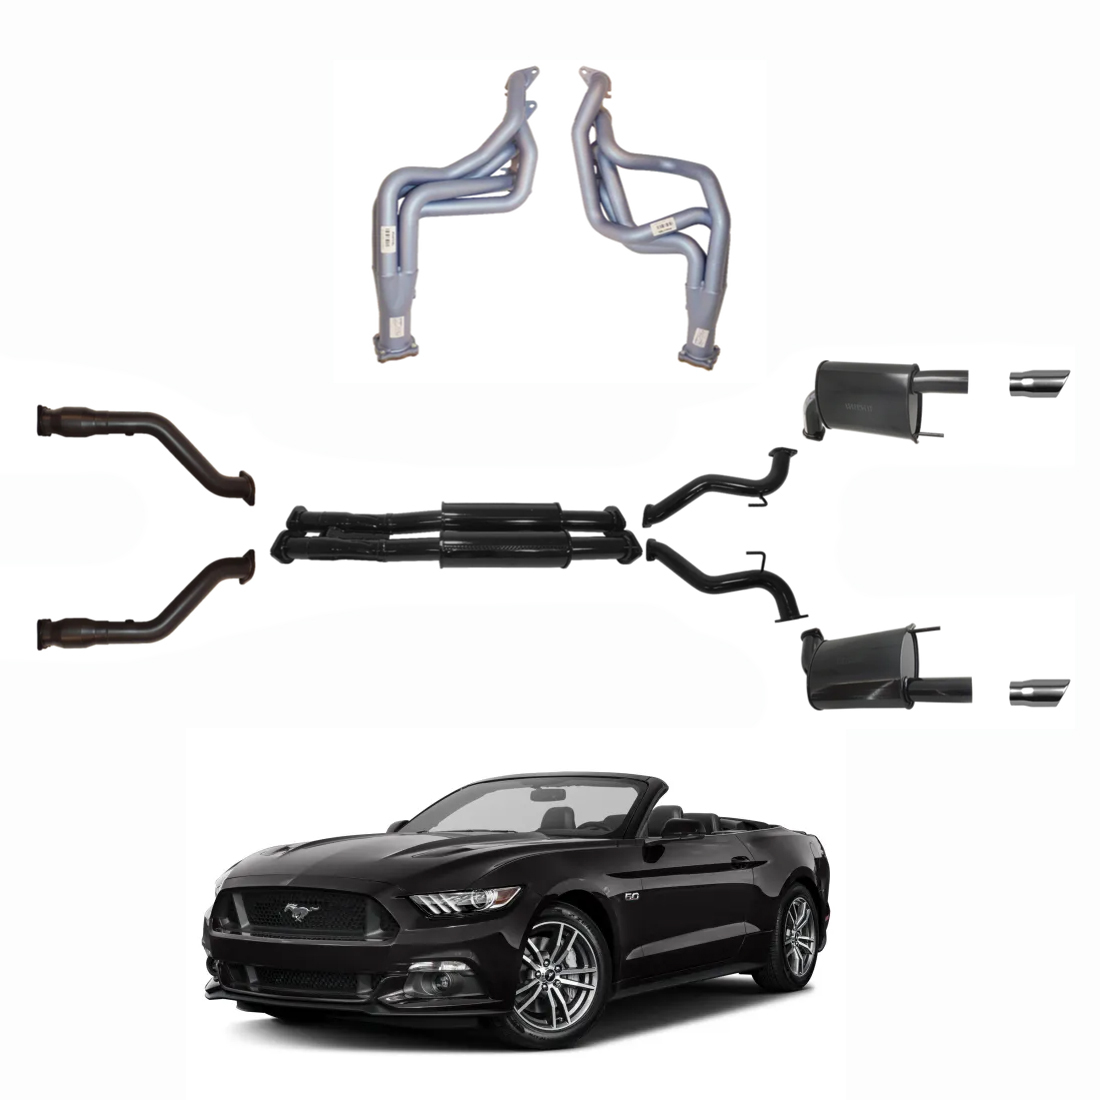 Ford Mustang Convertible 5.0L Headers, Cats and Twin 3" Inch Exhaust System for RH Drive Only image